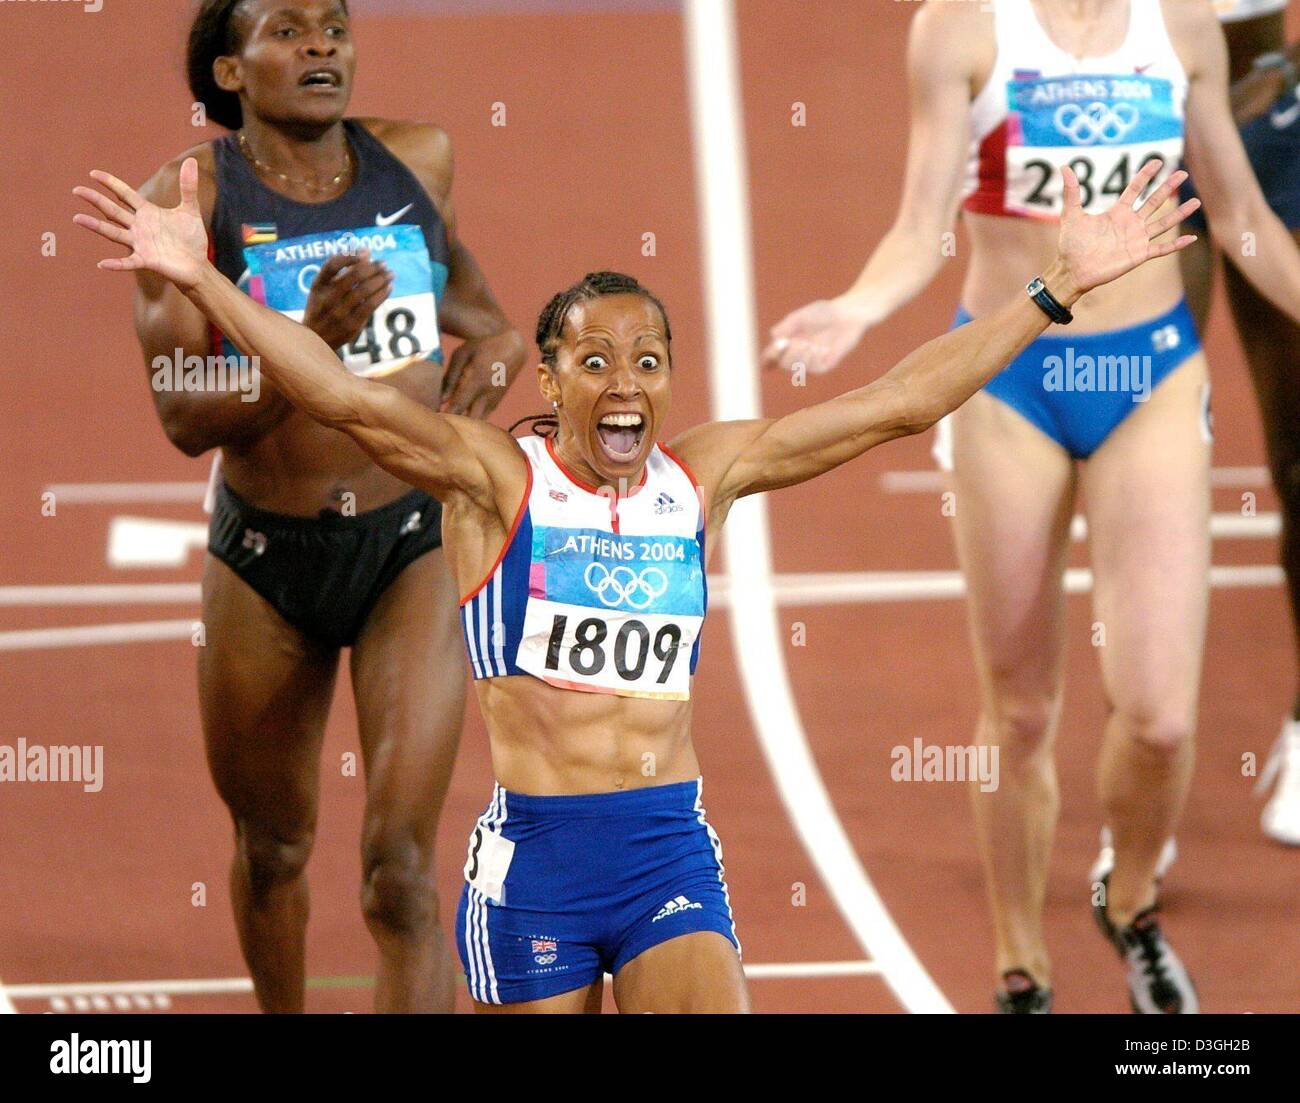 (dpa) - Kelly Holmes (C) from Great Britain jubilates as she crosses the finish line ahead of Mozambique's Maria de Lurdes Mutola (L) to win the gold medal in the women's 800m at the 2004 Olympic Games in Athens, Greece, 23 August 2004. Stock Photo